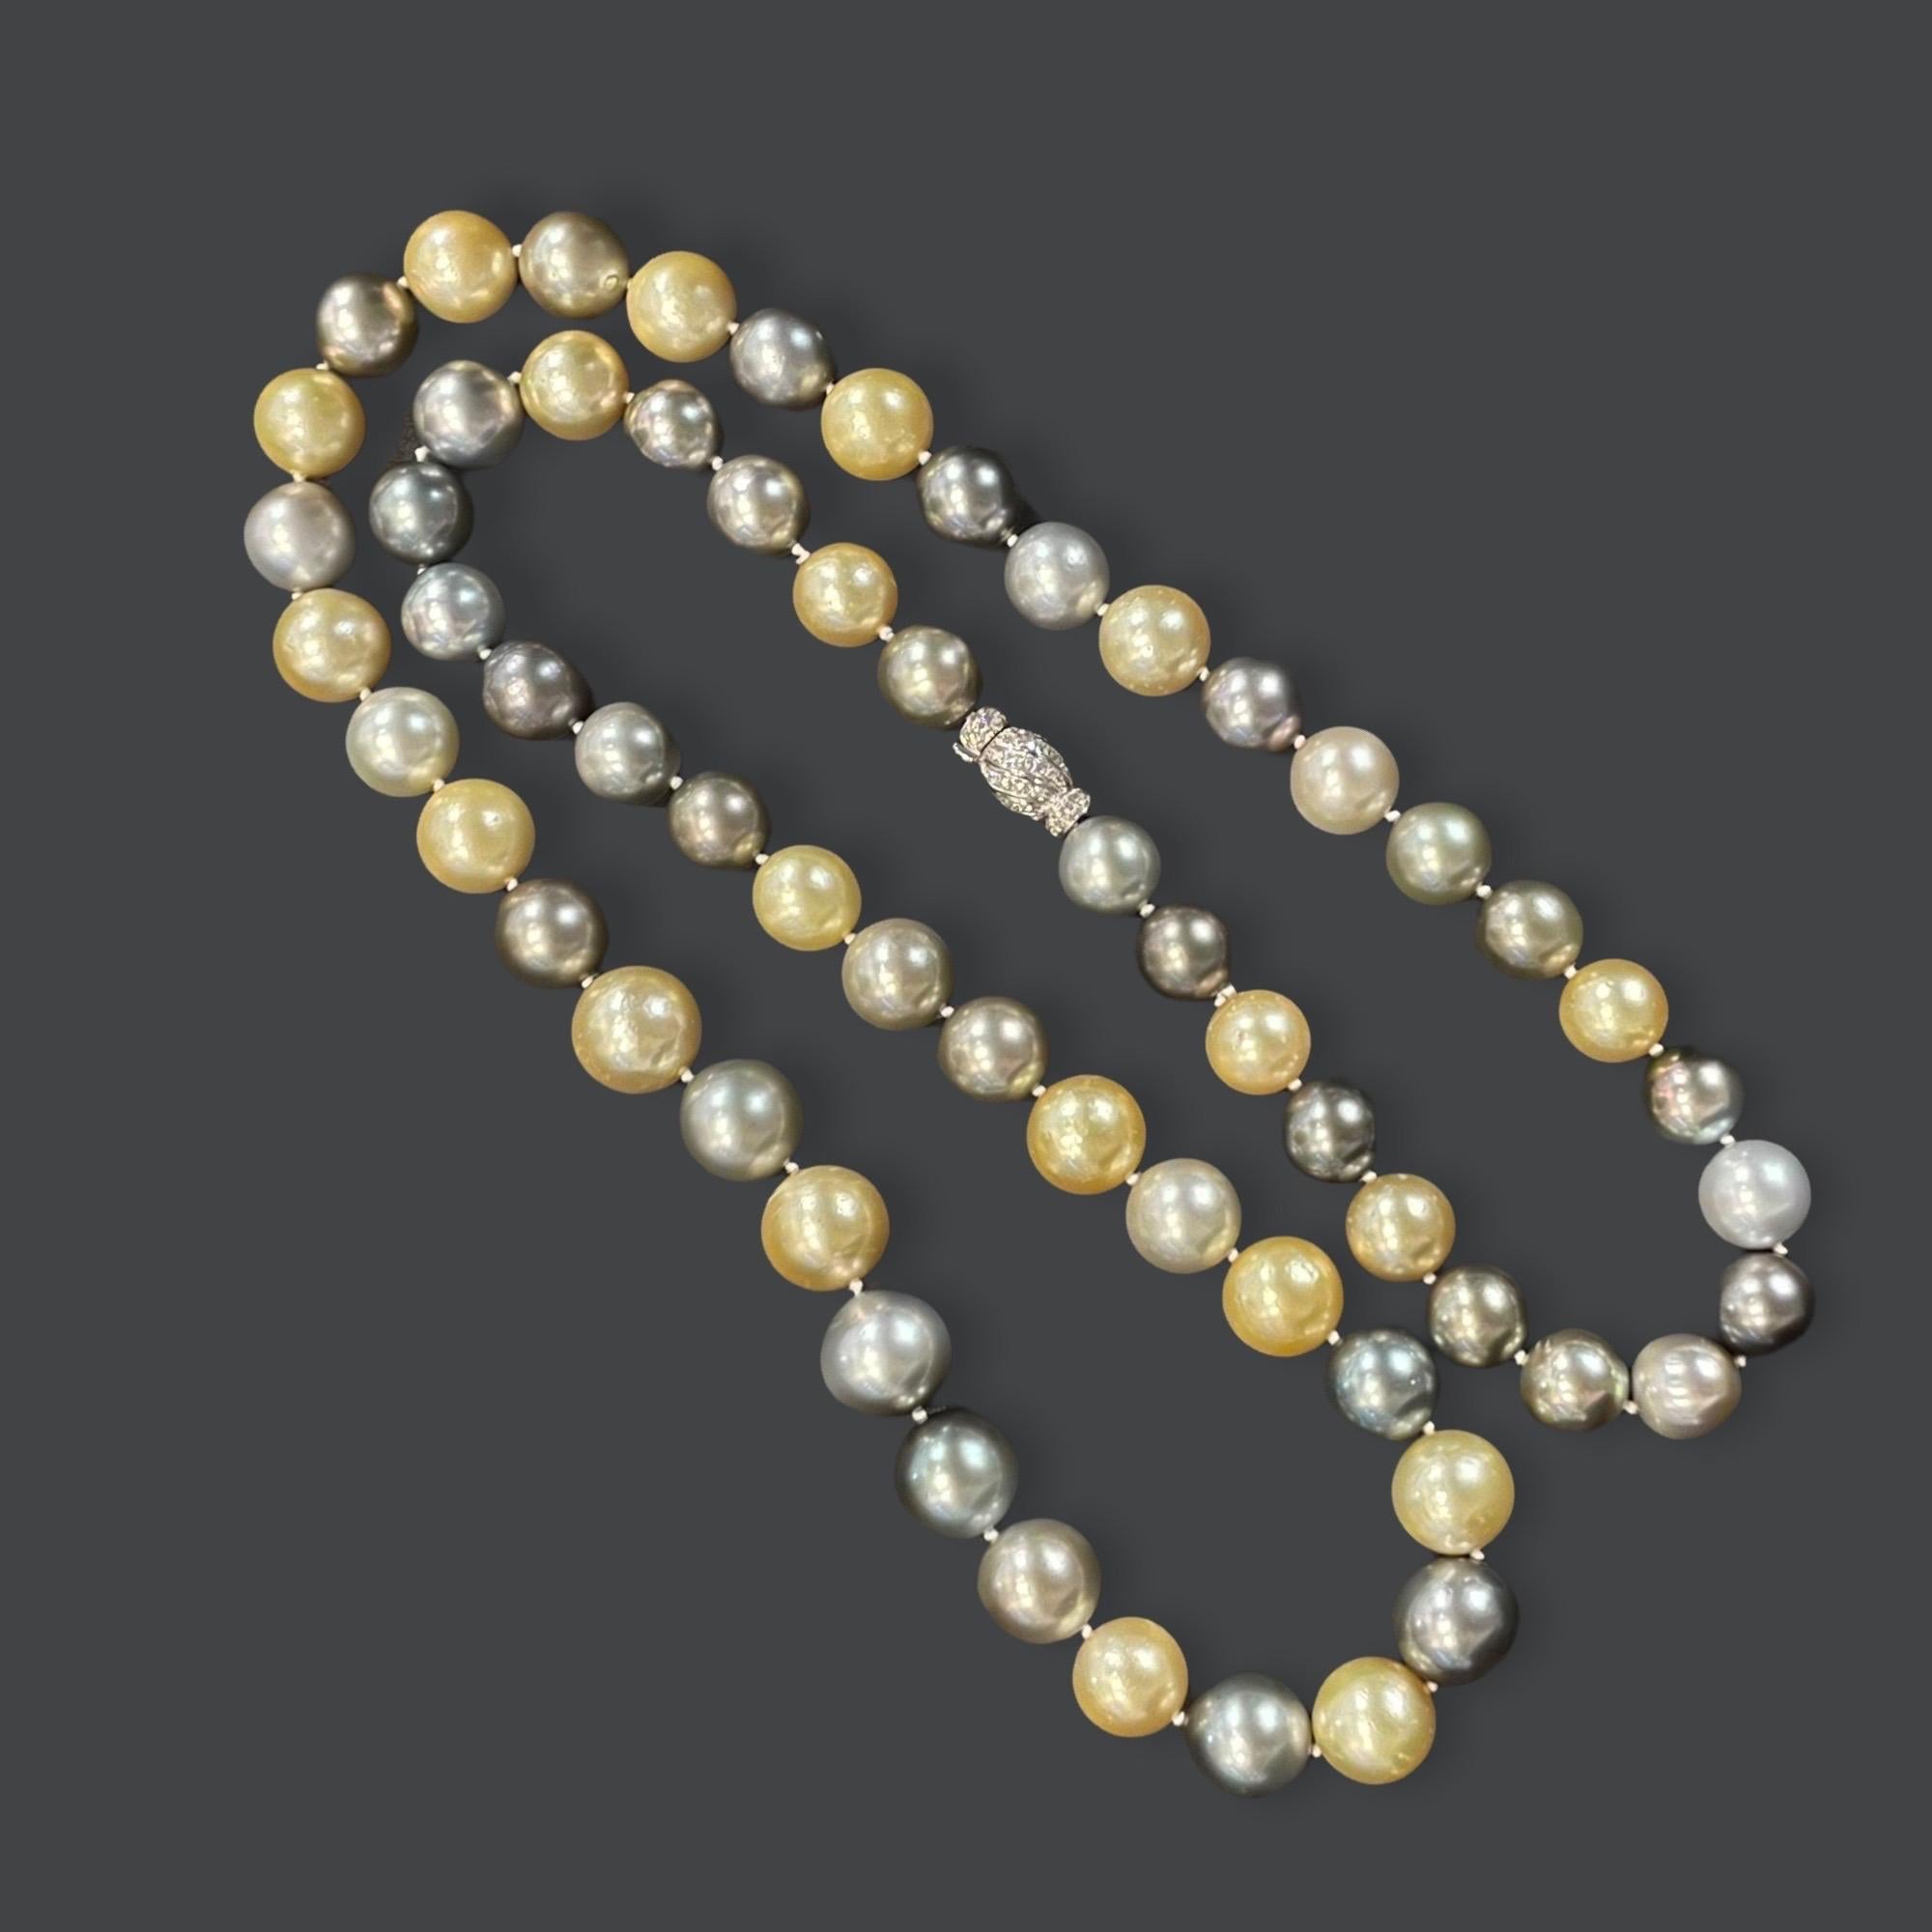 Exquisite mulit- colored (golden, grey, black ) south sea pearl necklace that can be worn long or double covered, The 60 pearls have beautiful luster and what makes them so stunning are their substantial size of 13mm x 16mm.  The whole necklace is